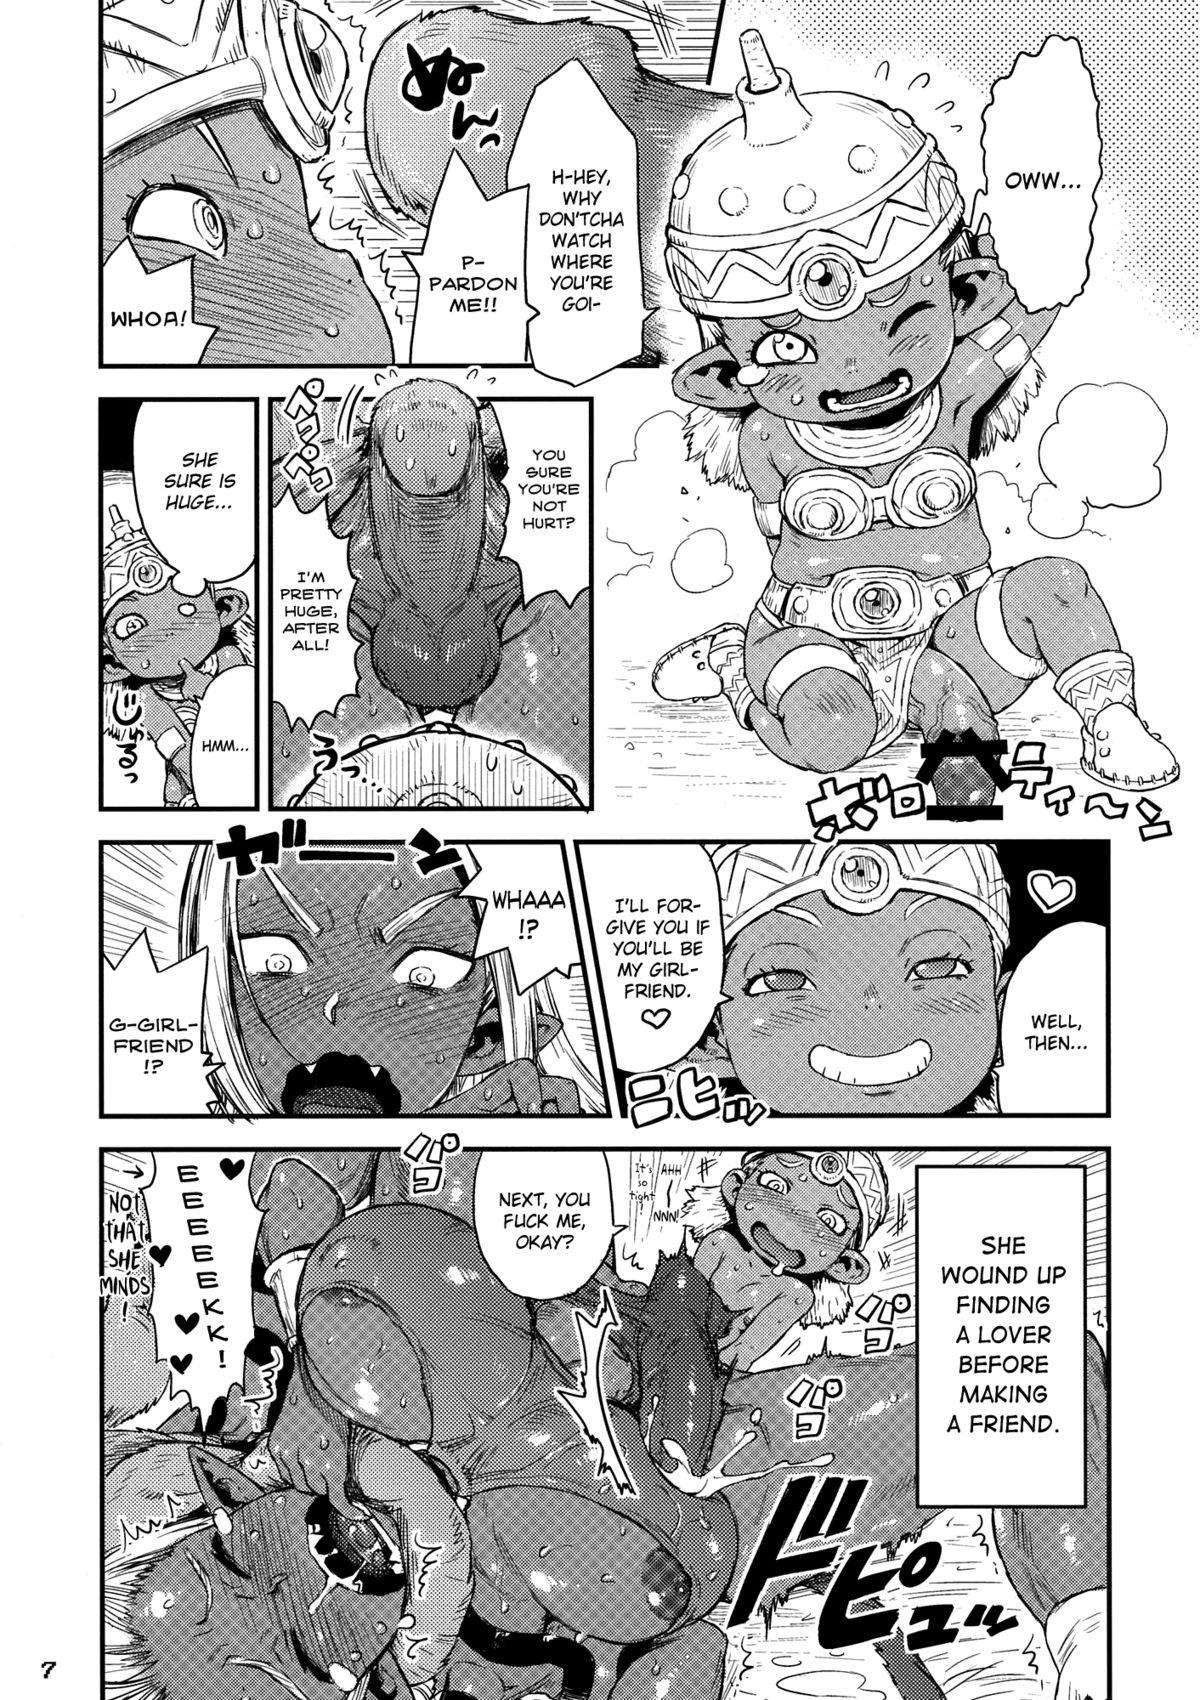 Ass Licking Manya & Ogre FPS β - Dragon quest x Celeb - Page 7